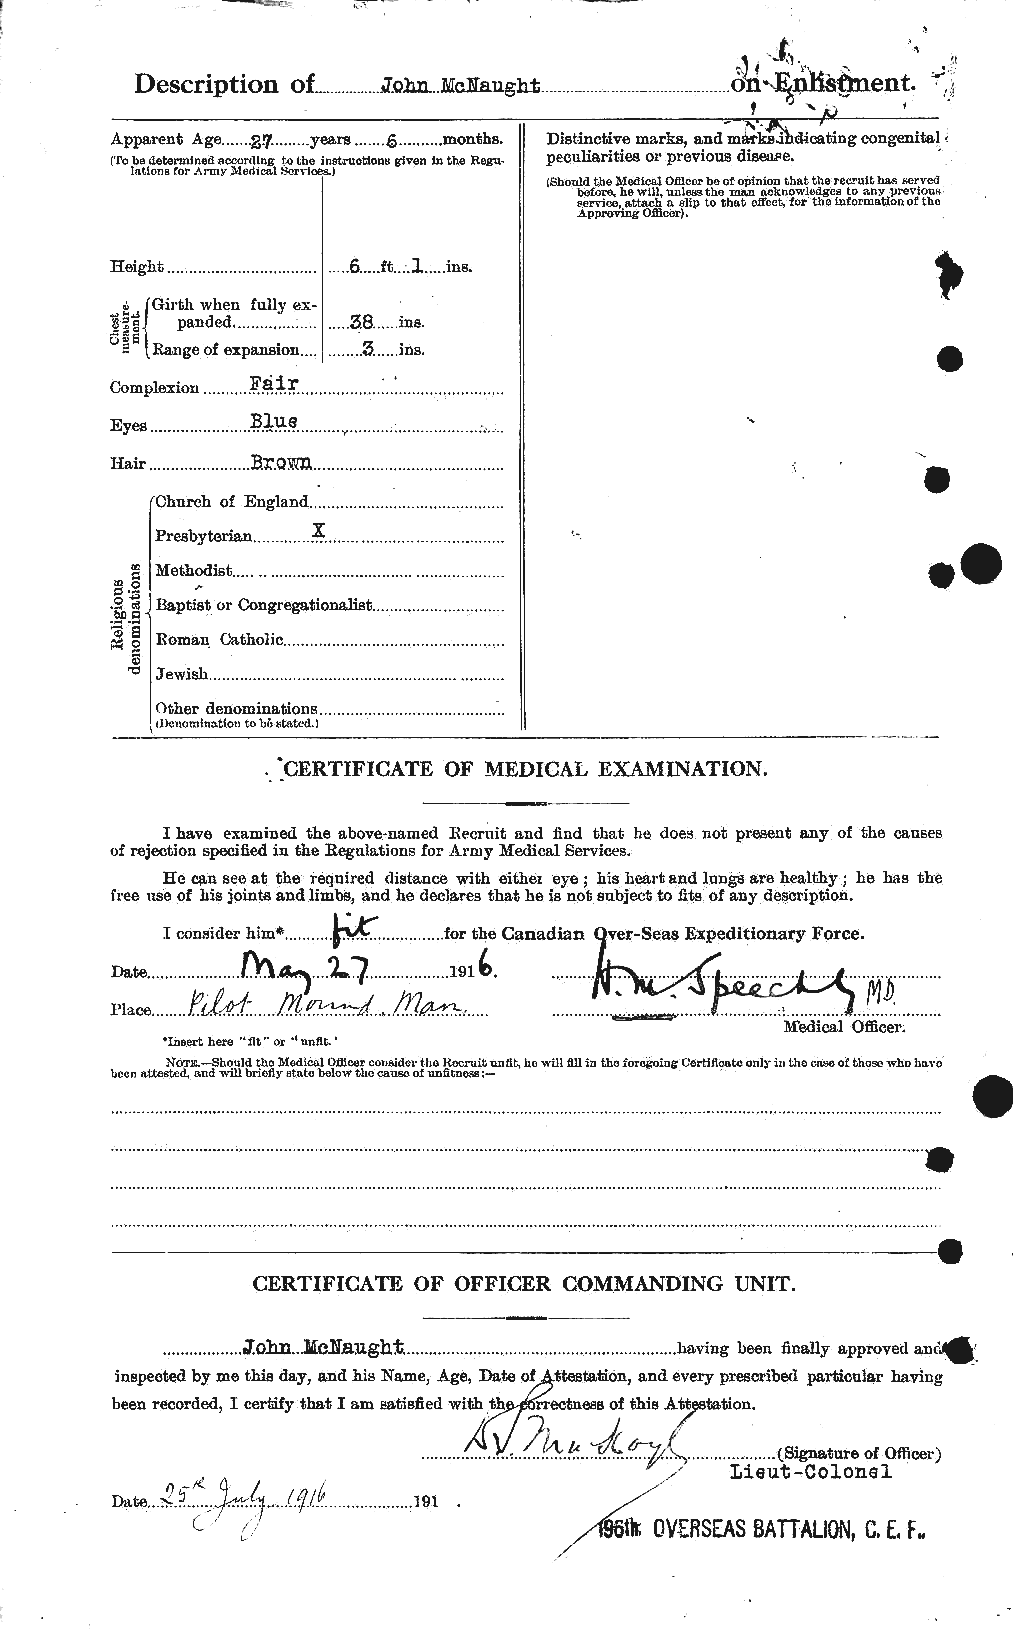 Personnel Records of the First World War - CEF 538368b